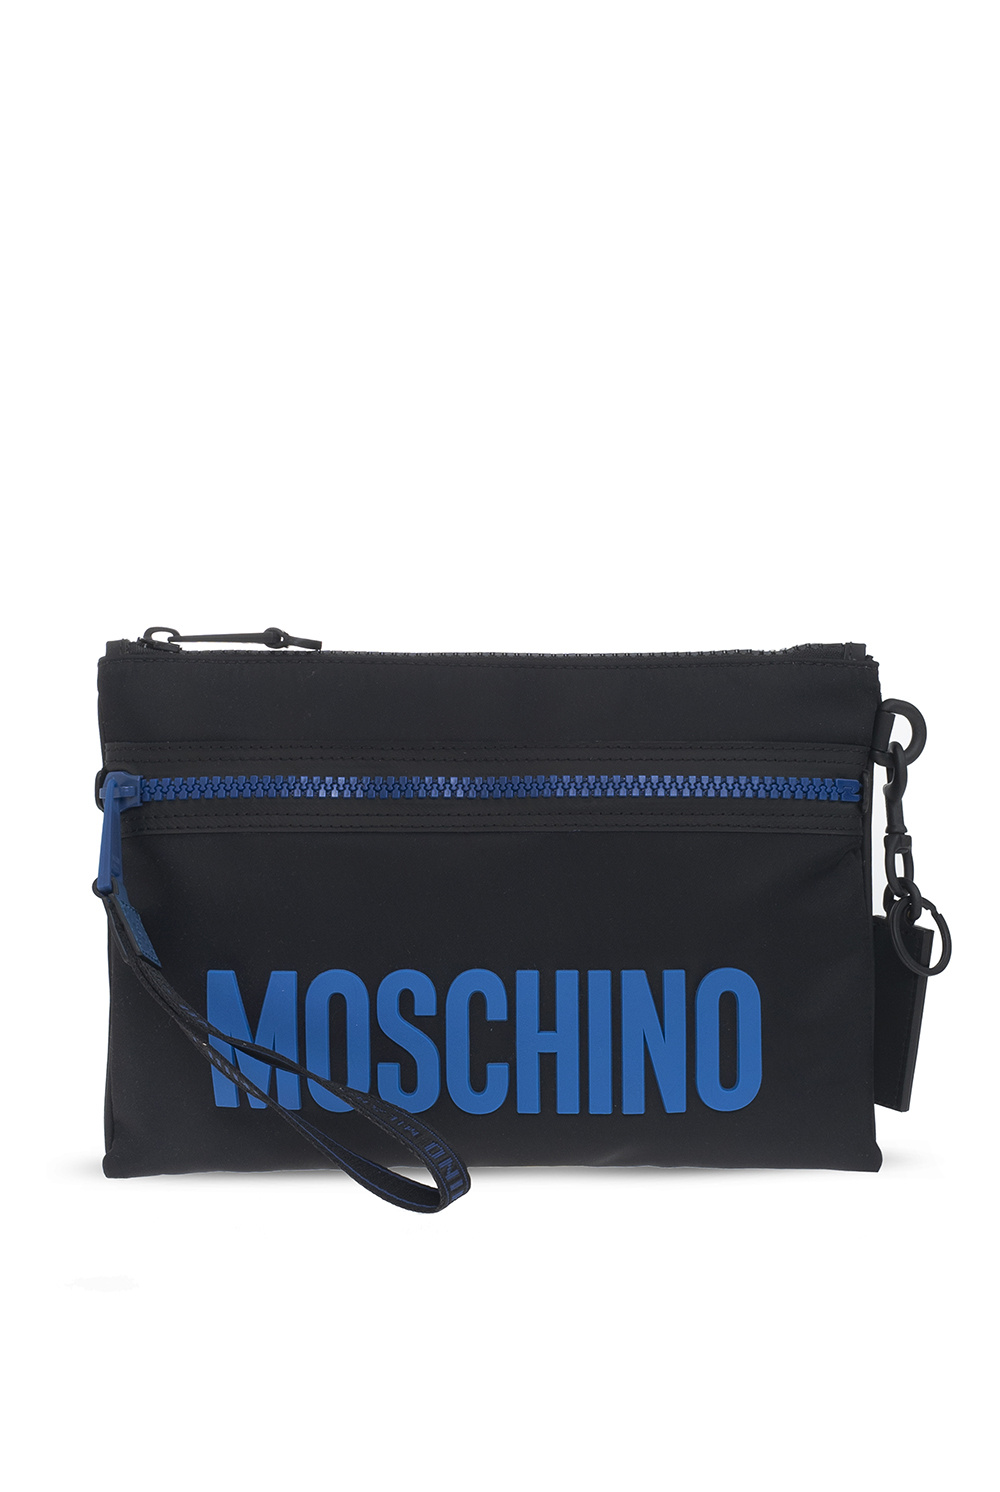 Moschino Backpack CONVERSE 10019900-A19 680